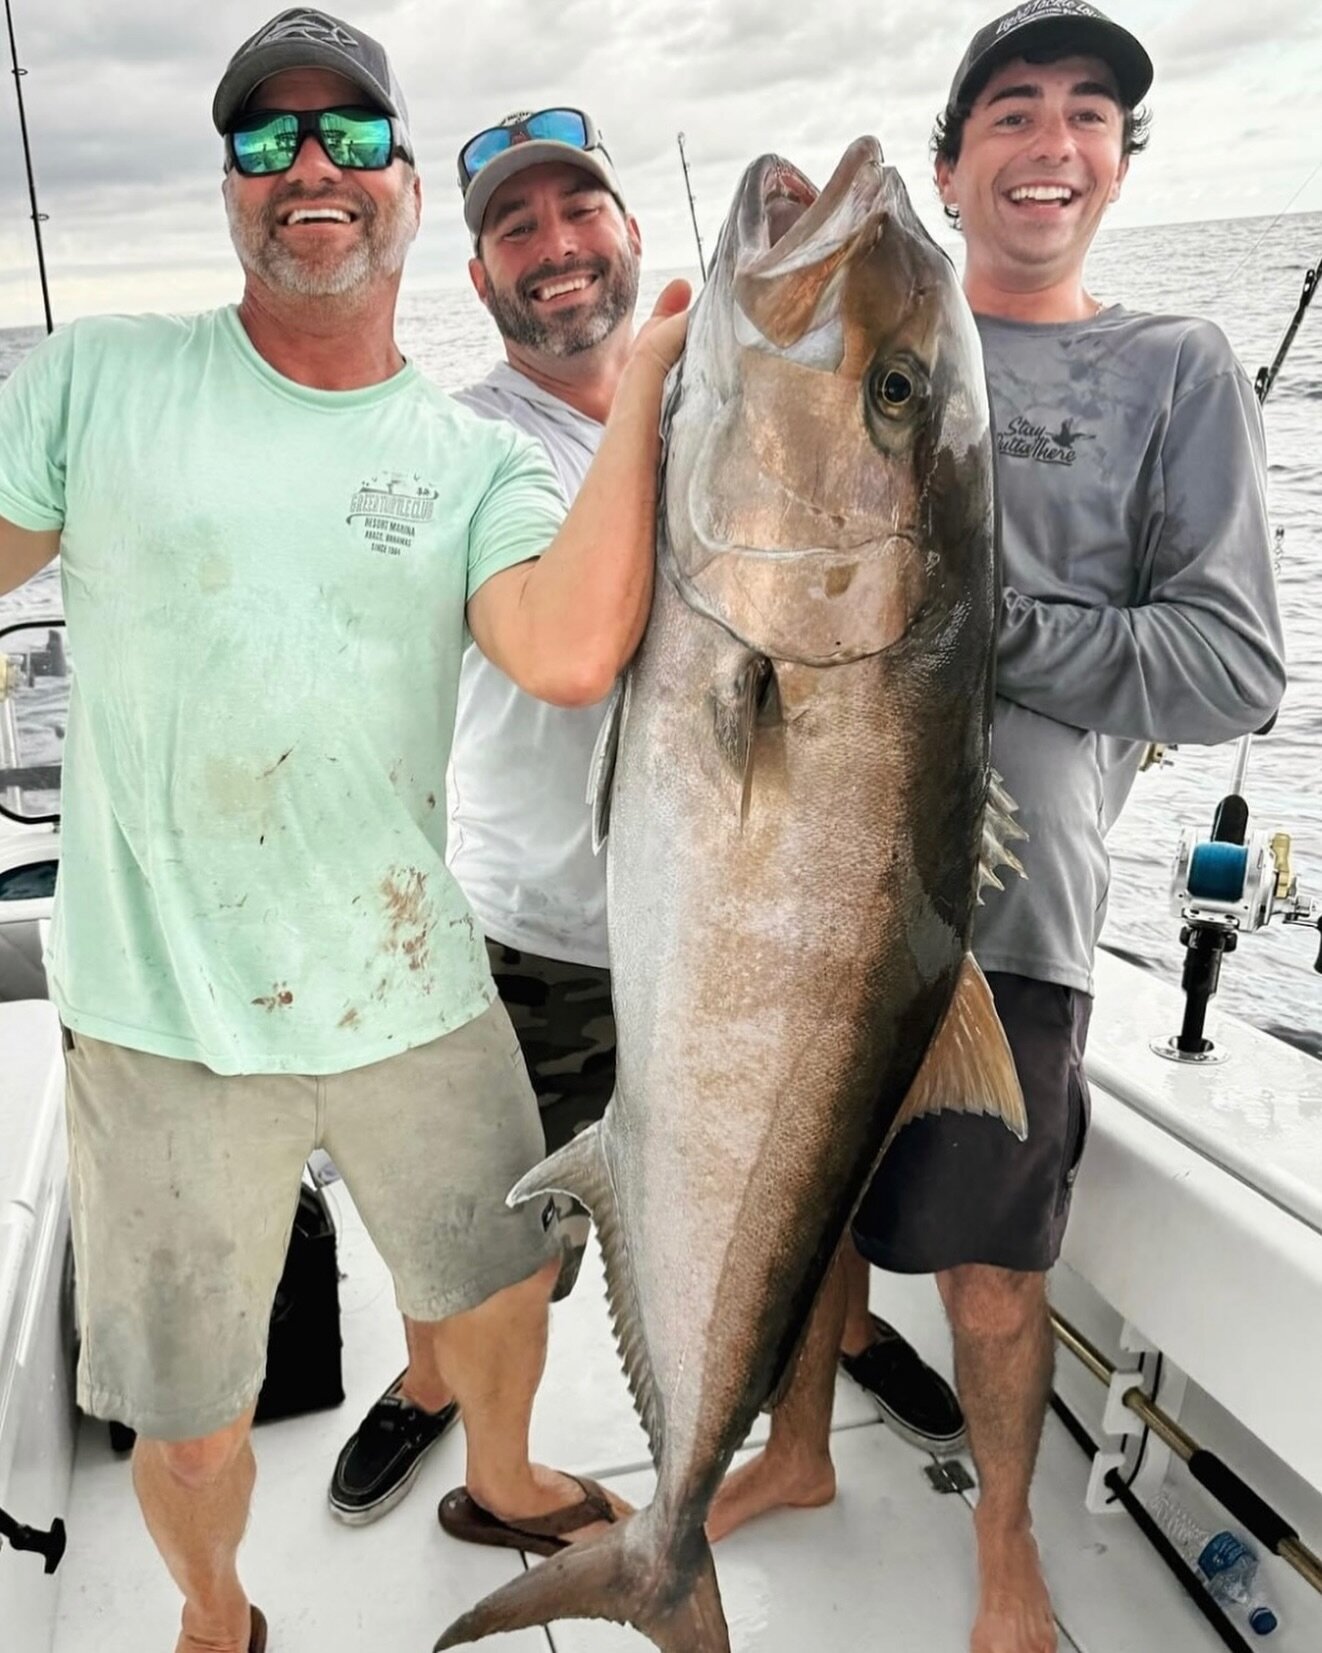 We have some availability this month if anyone&rsquo;s looking to get on the water ! 🎣 
give us a call or book online
(941) 545-0924
Amioffshore.com
#annamariaisland #sarasota #longboatkey #tampabay #suzukimarine #yellowfinboats #fishingcharters